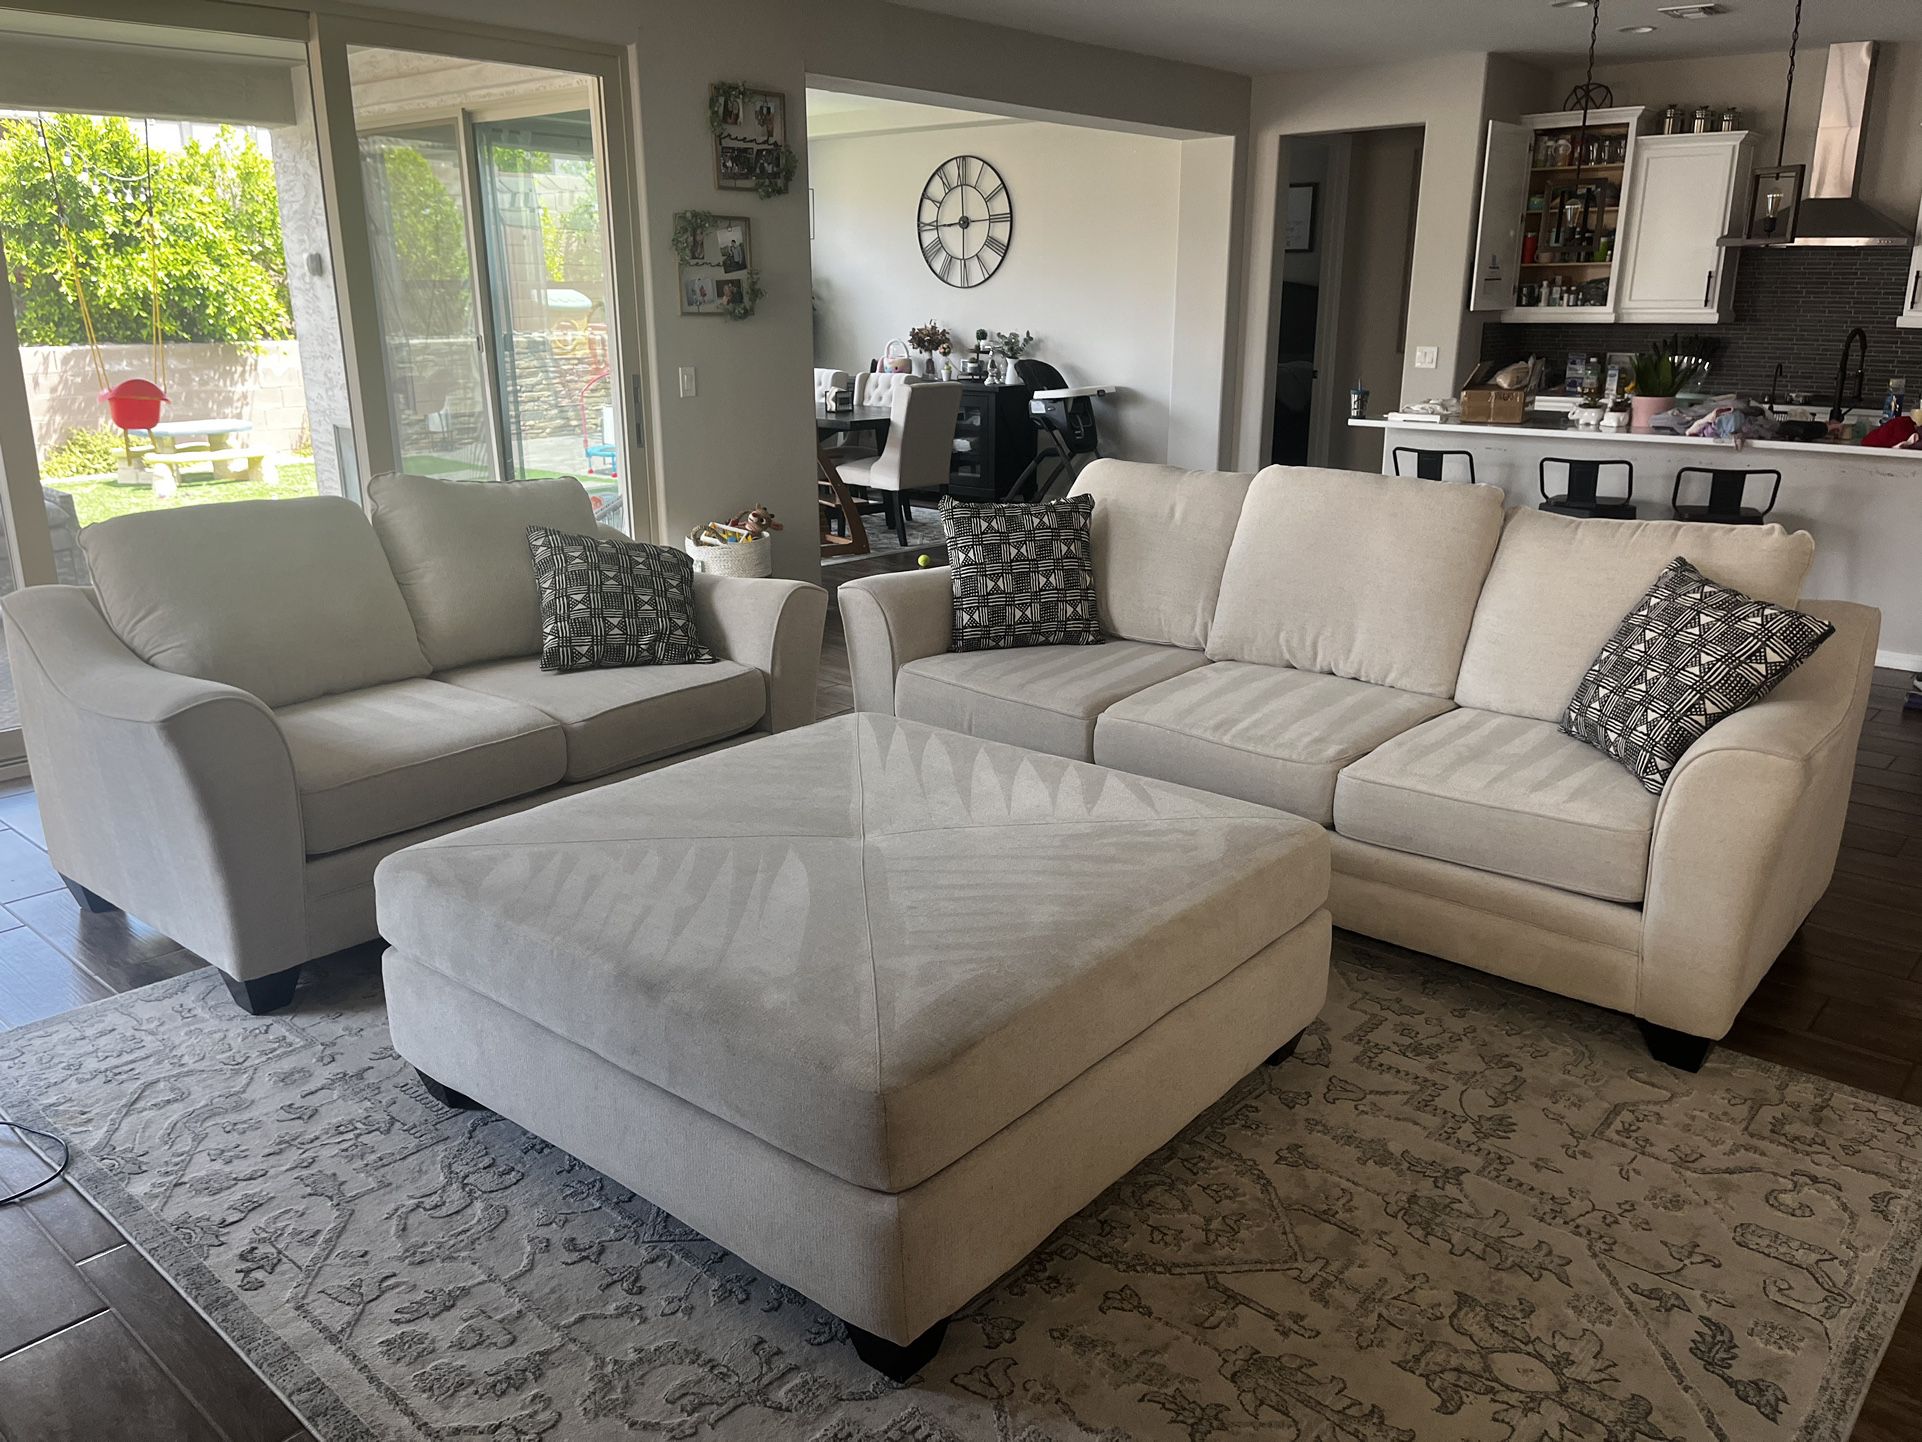 Beige Couches With Ottoman 